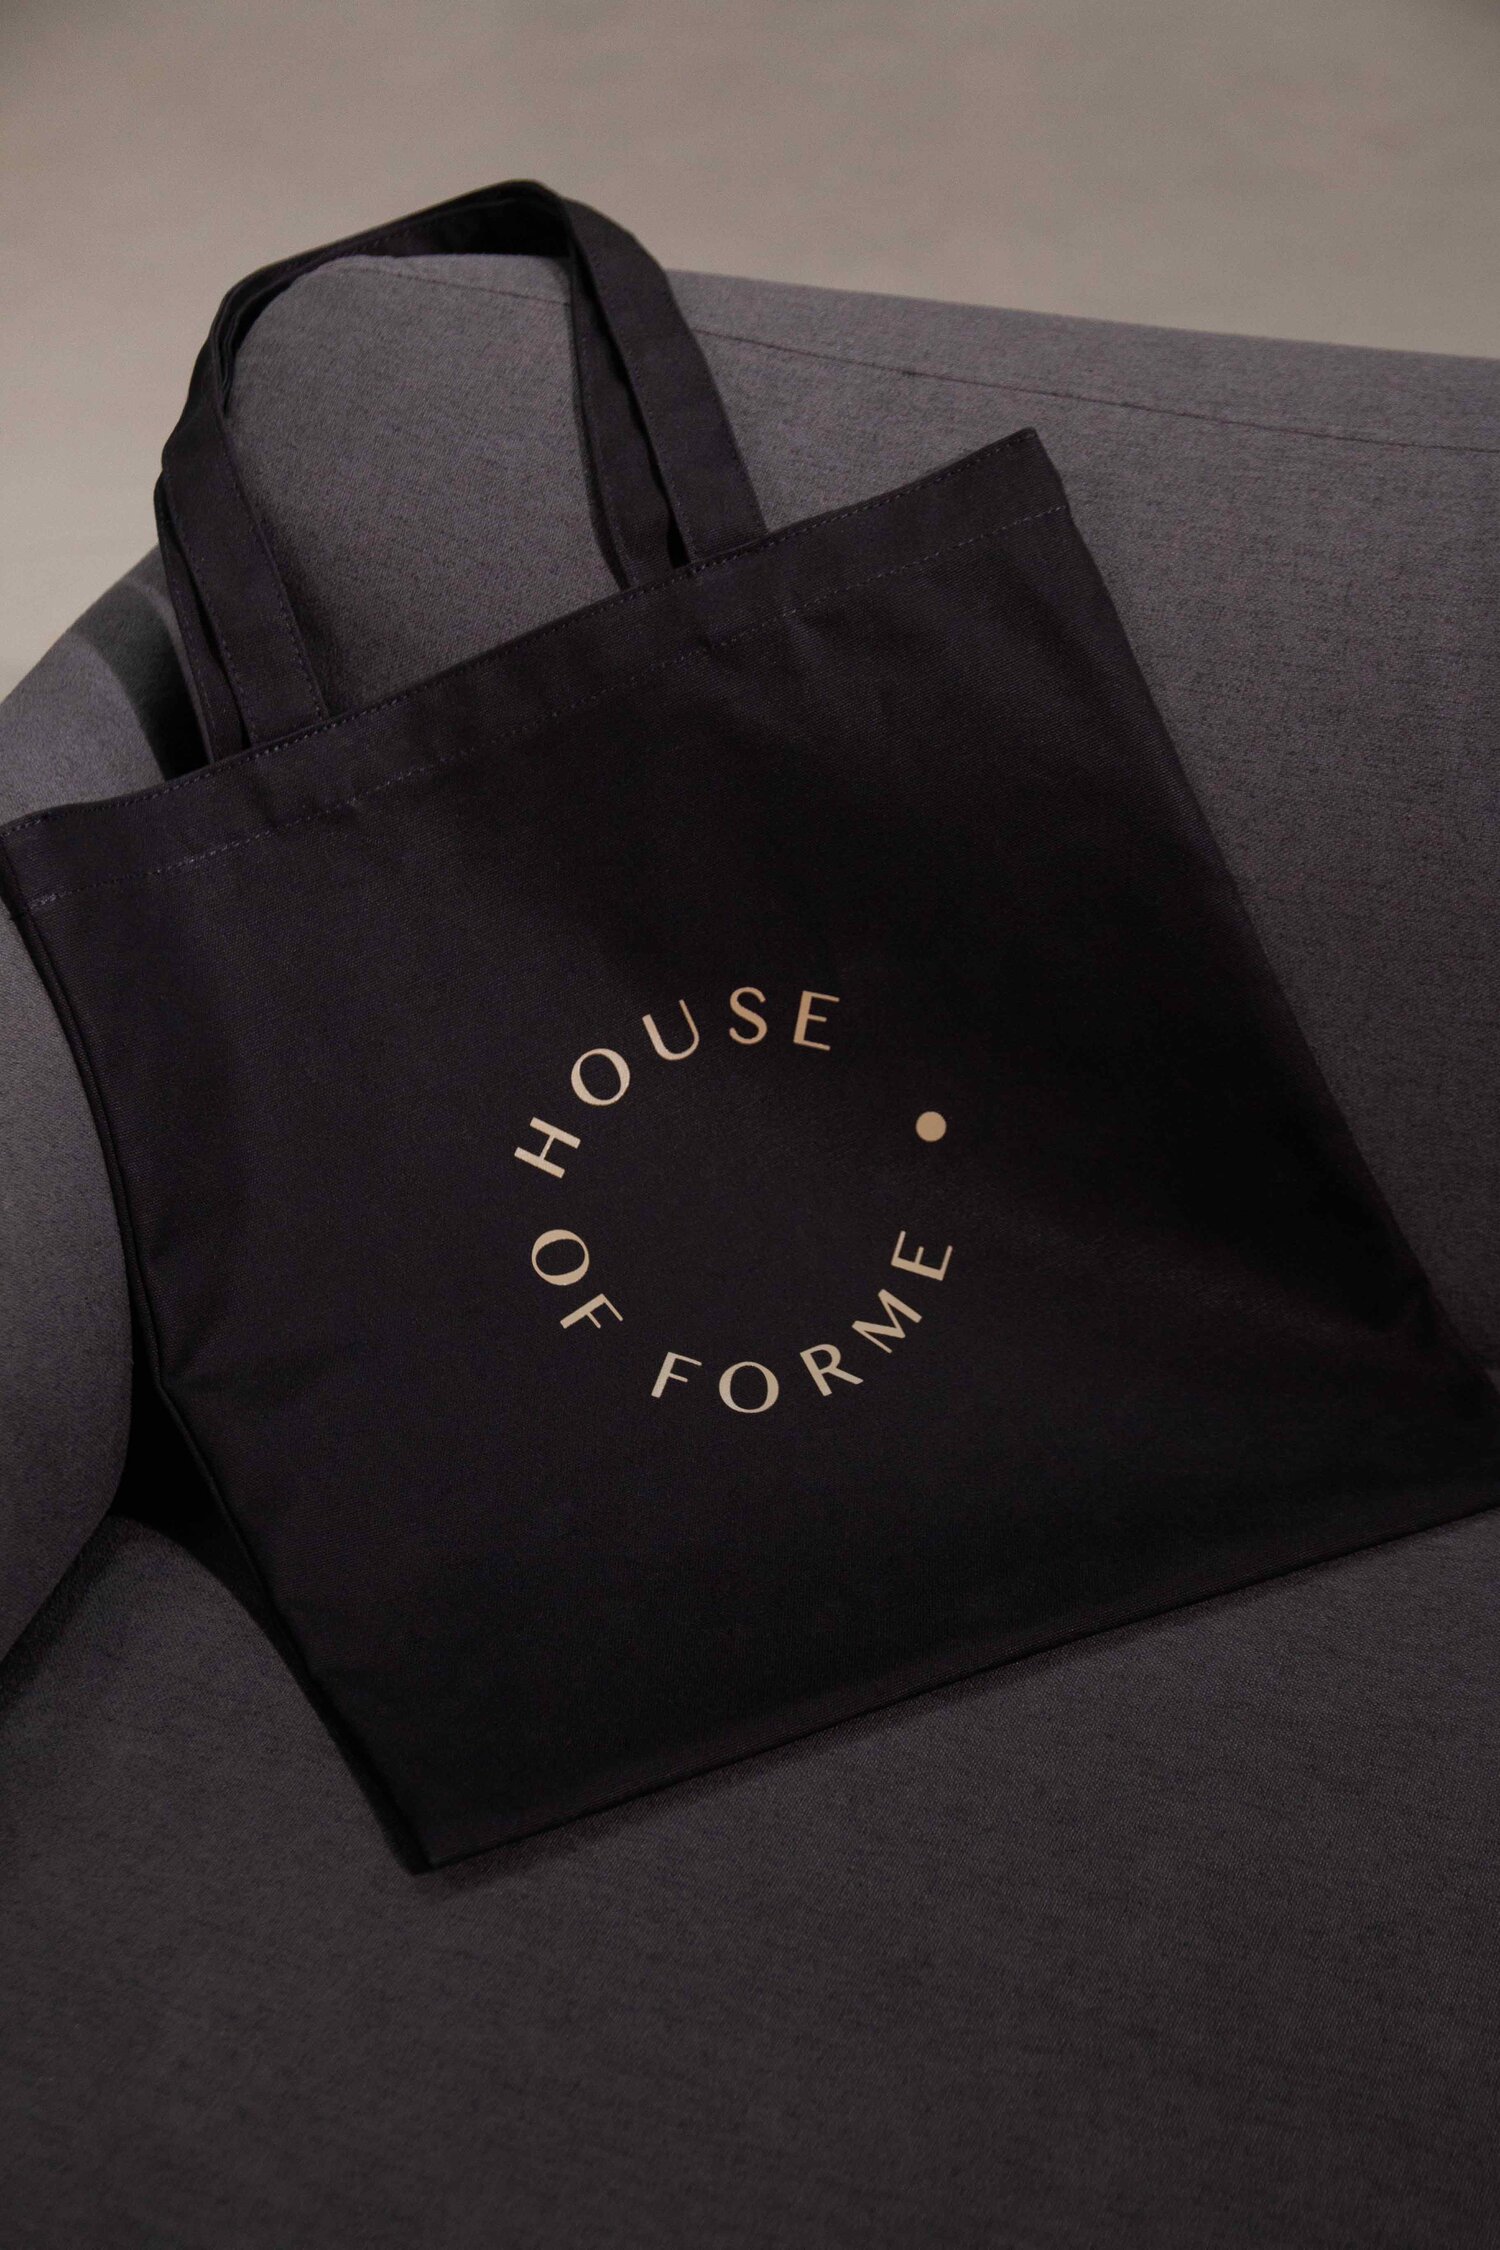 The Anatomy — House of Forme | Full Service Design & Creative Agency